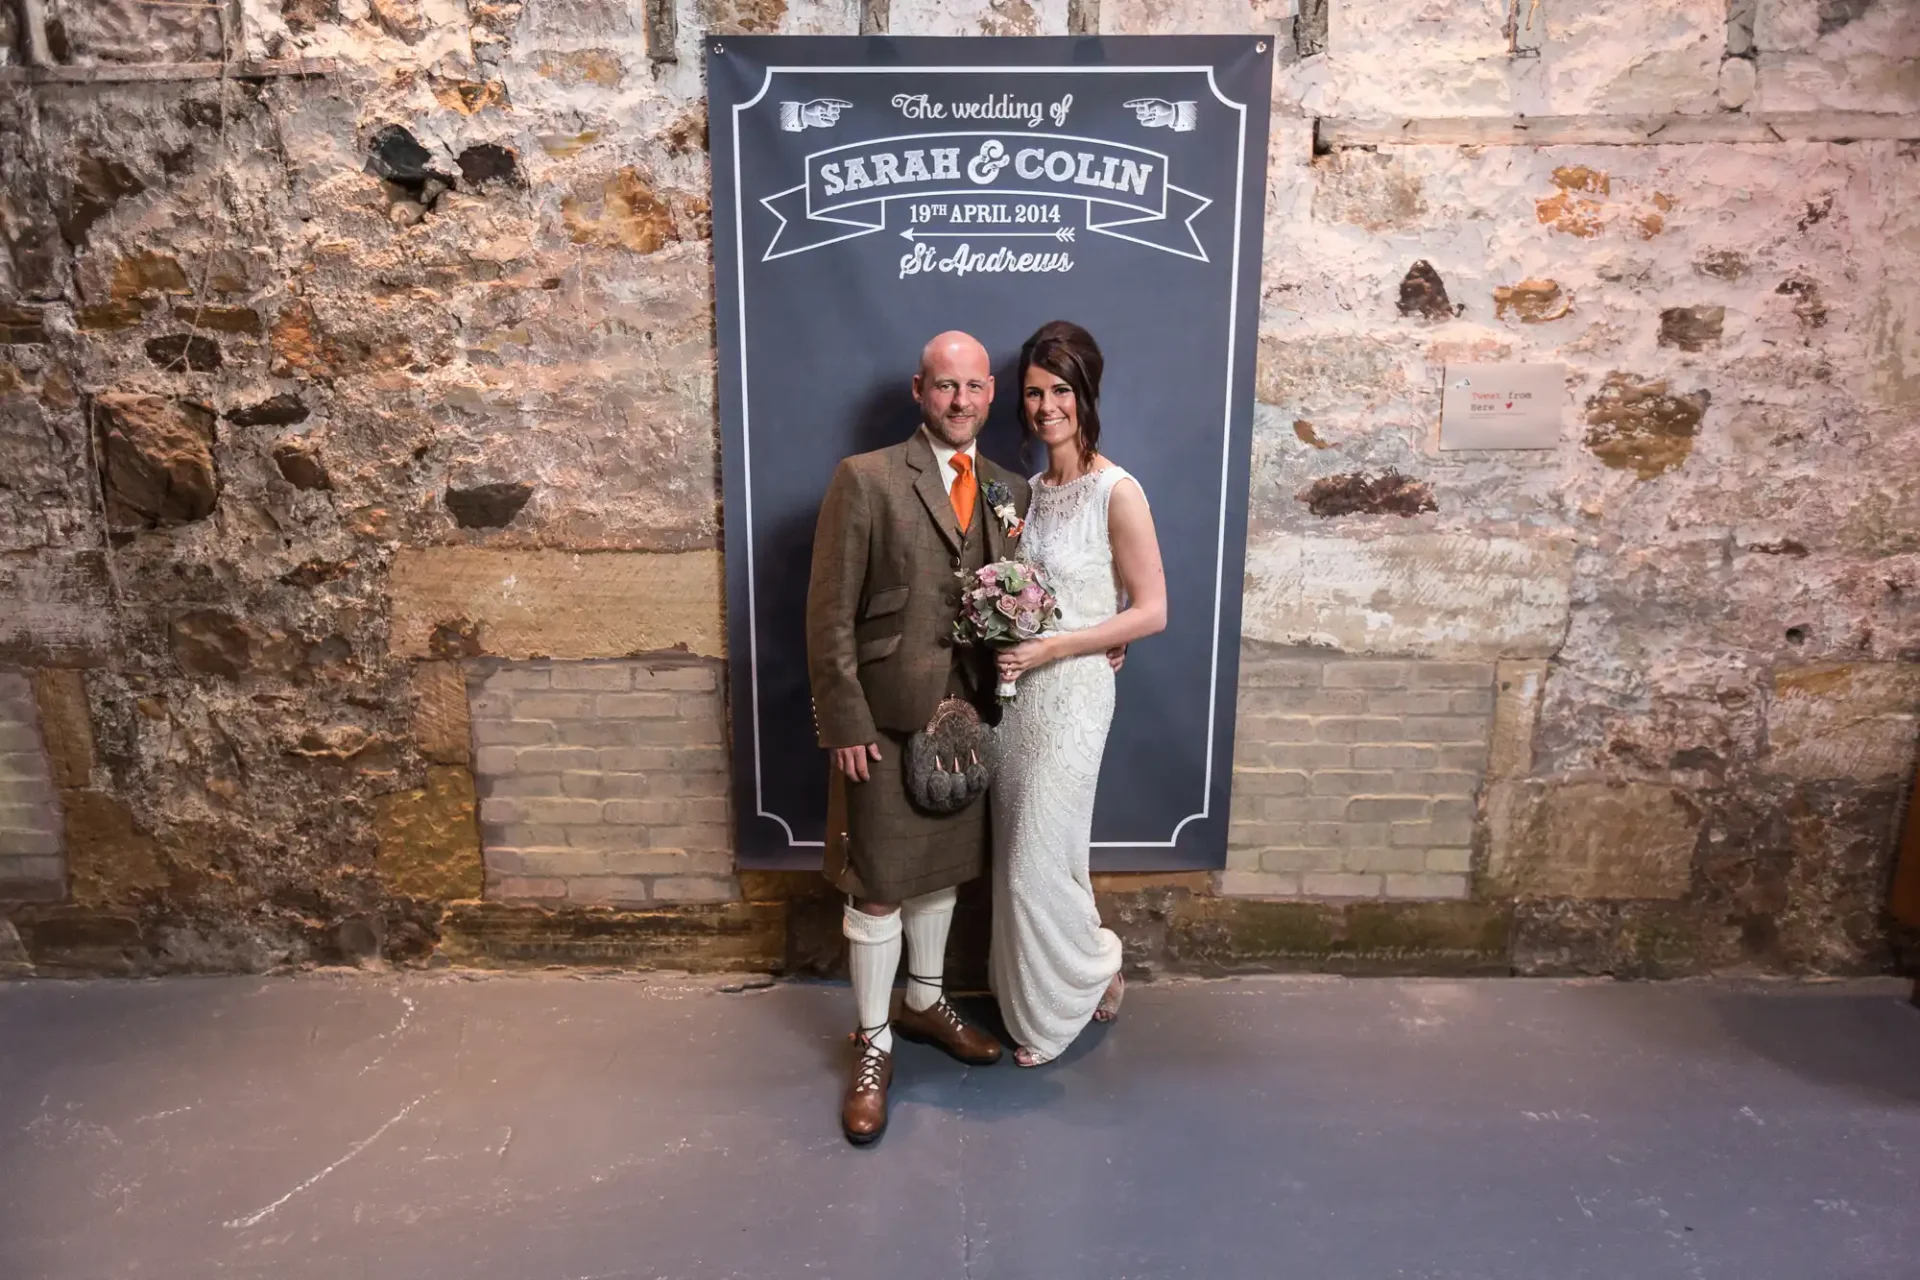 A bride and groom smiling in front of a decorative wedding sign with their names and wedding date, in a rustic indoor setting.